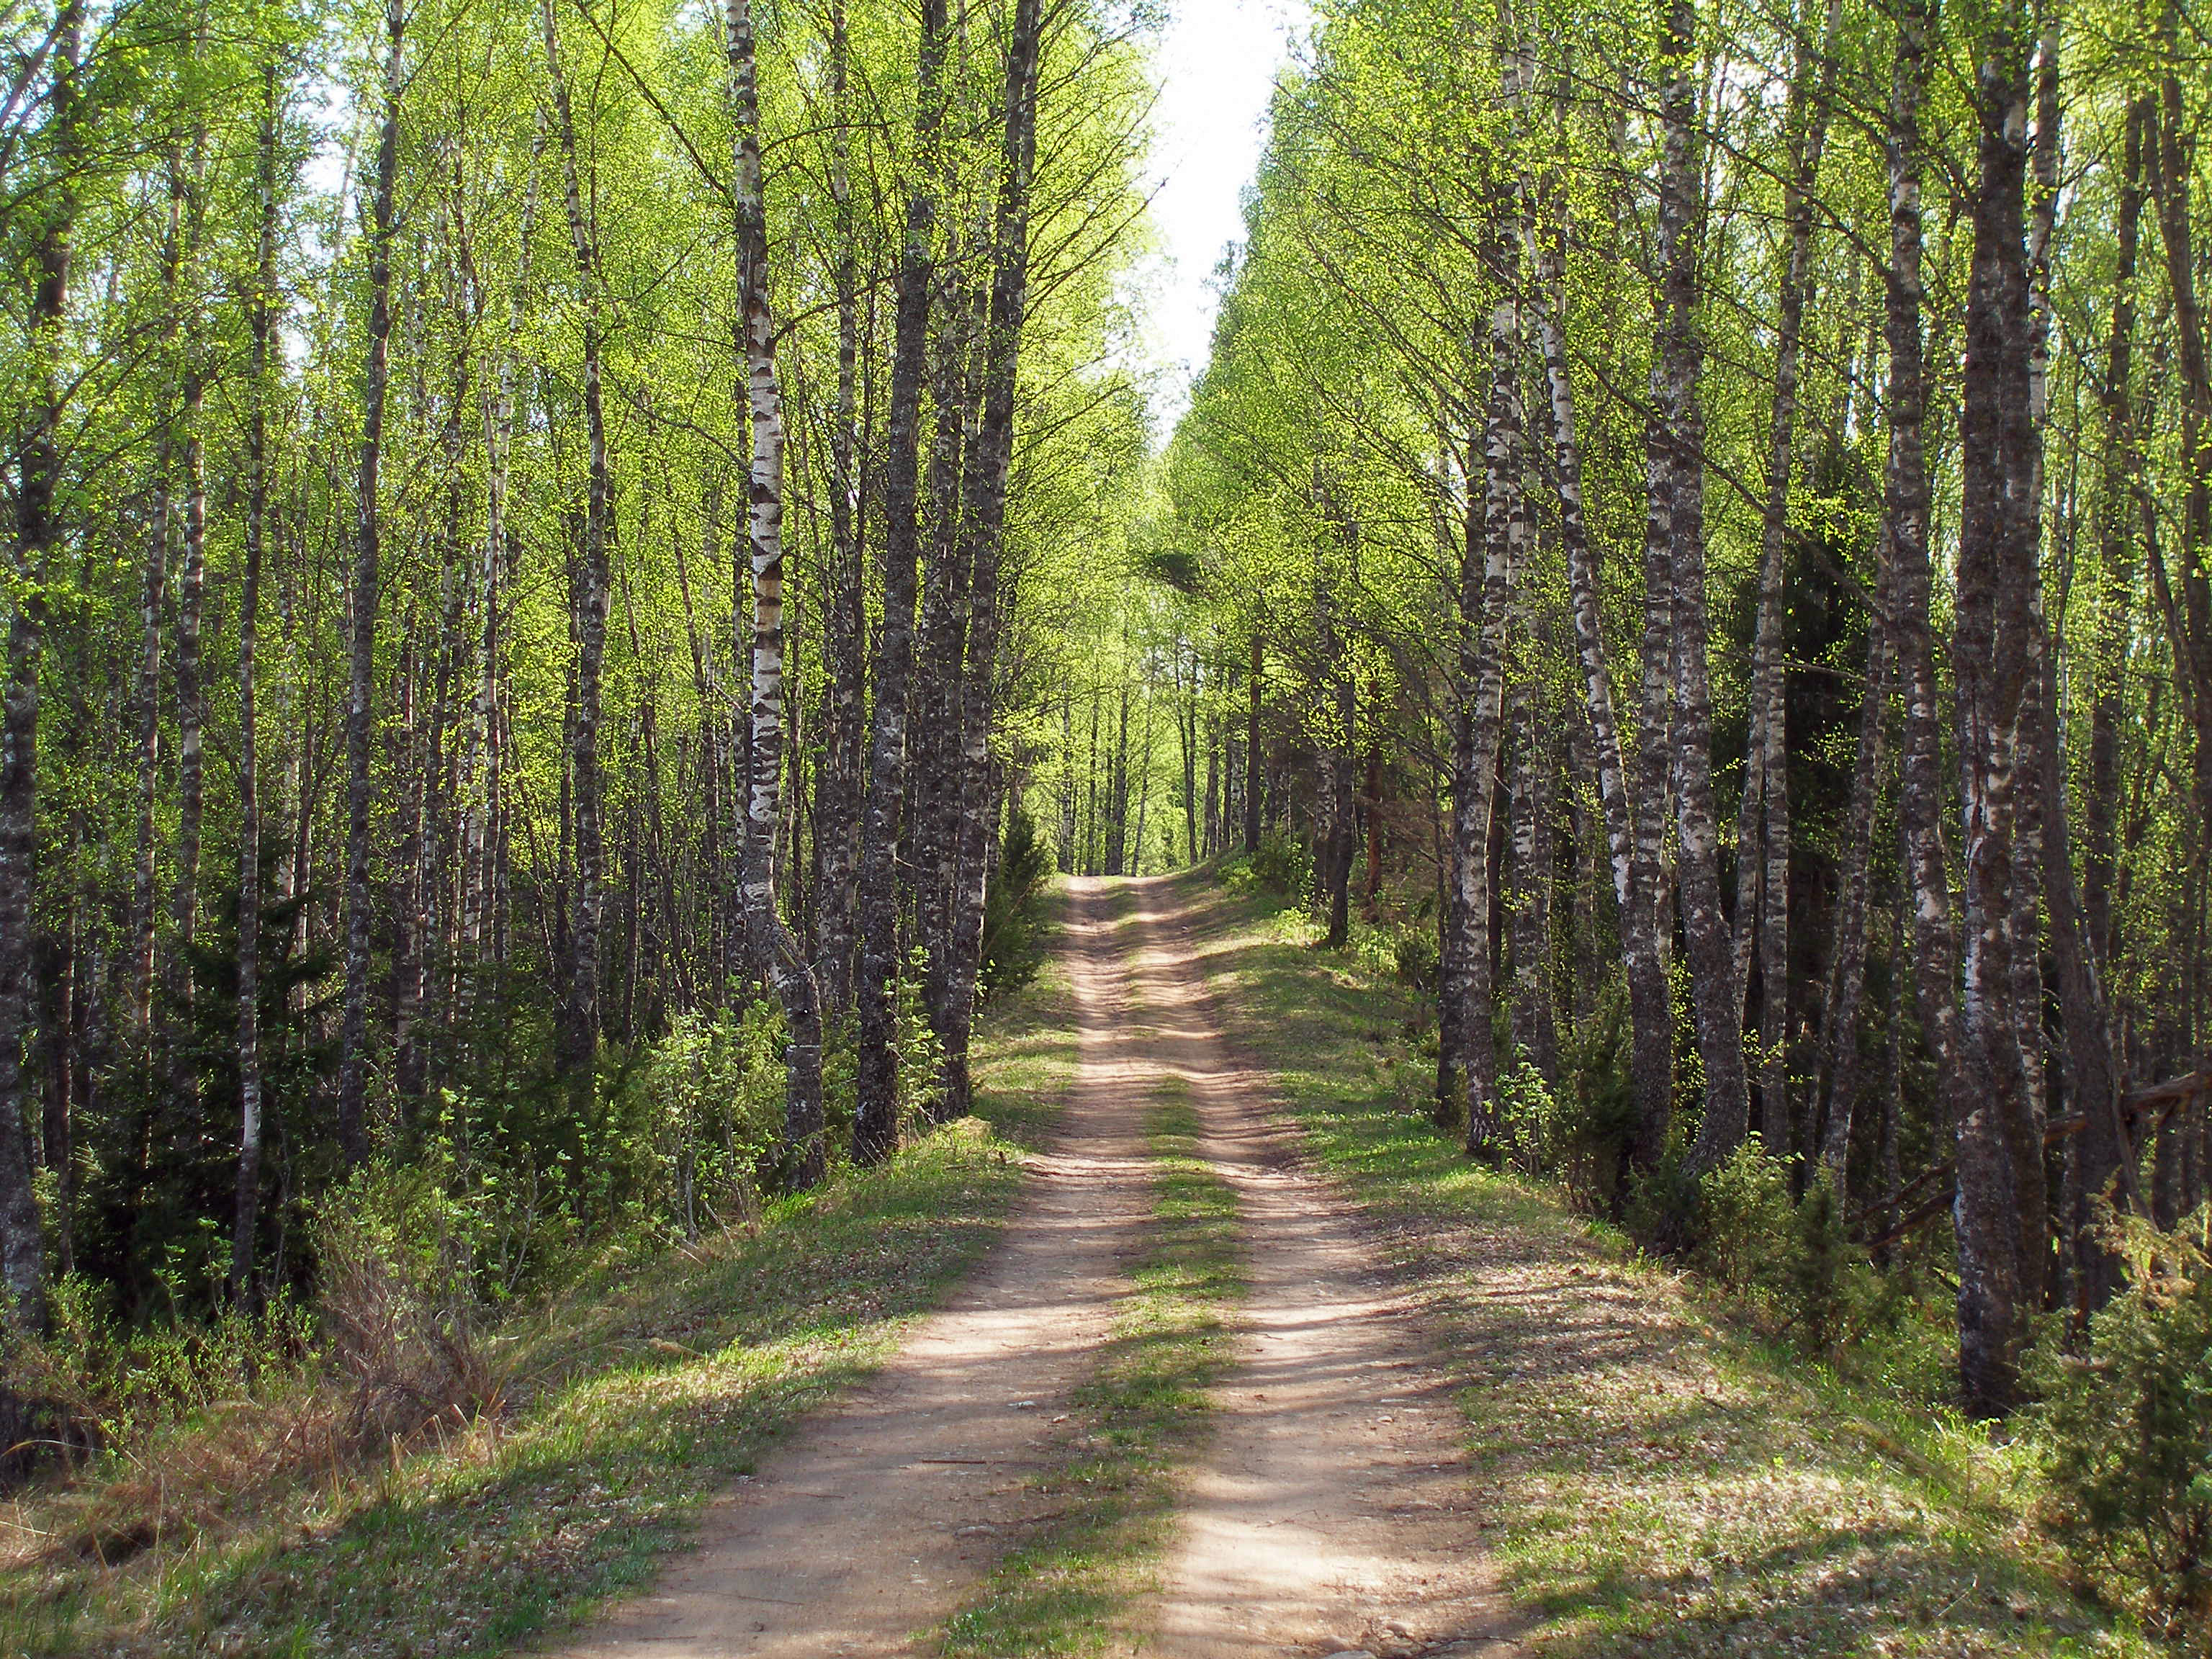 File:Forest trail in Põhja-Kõrvemaa, May 2010.jpg - Wikimedia Commons